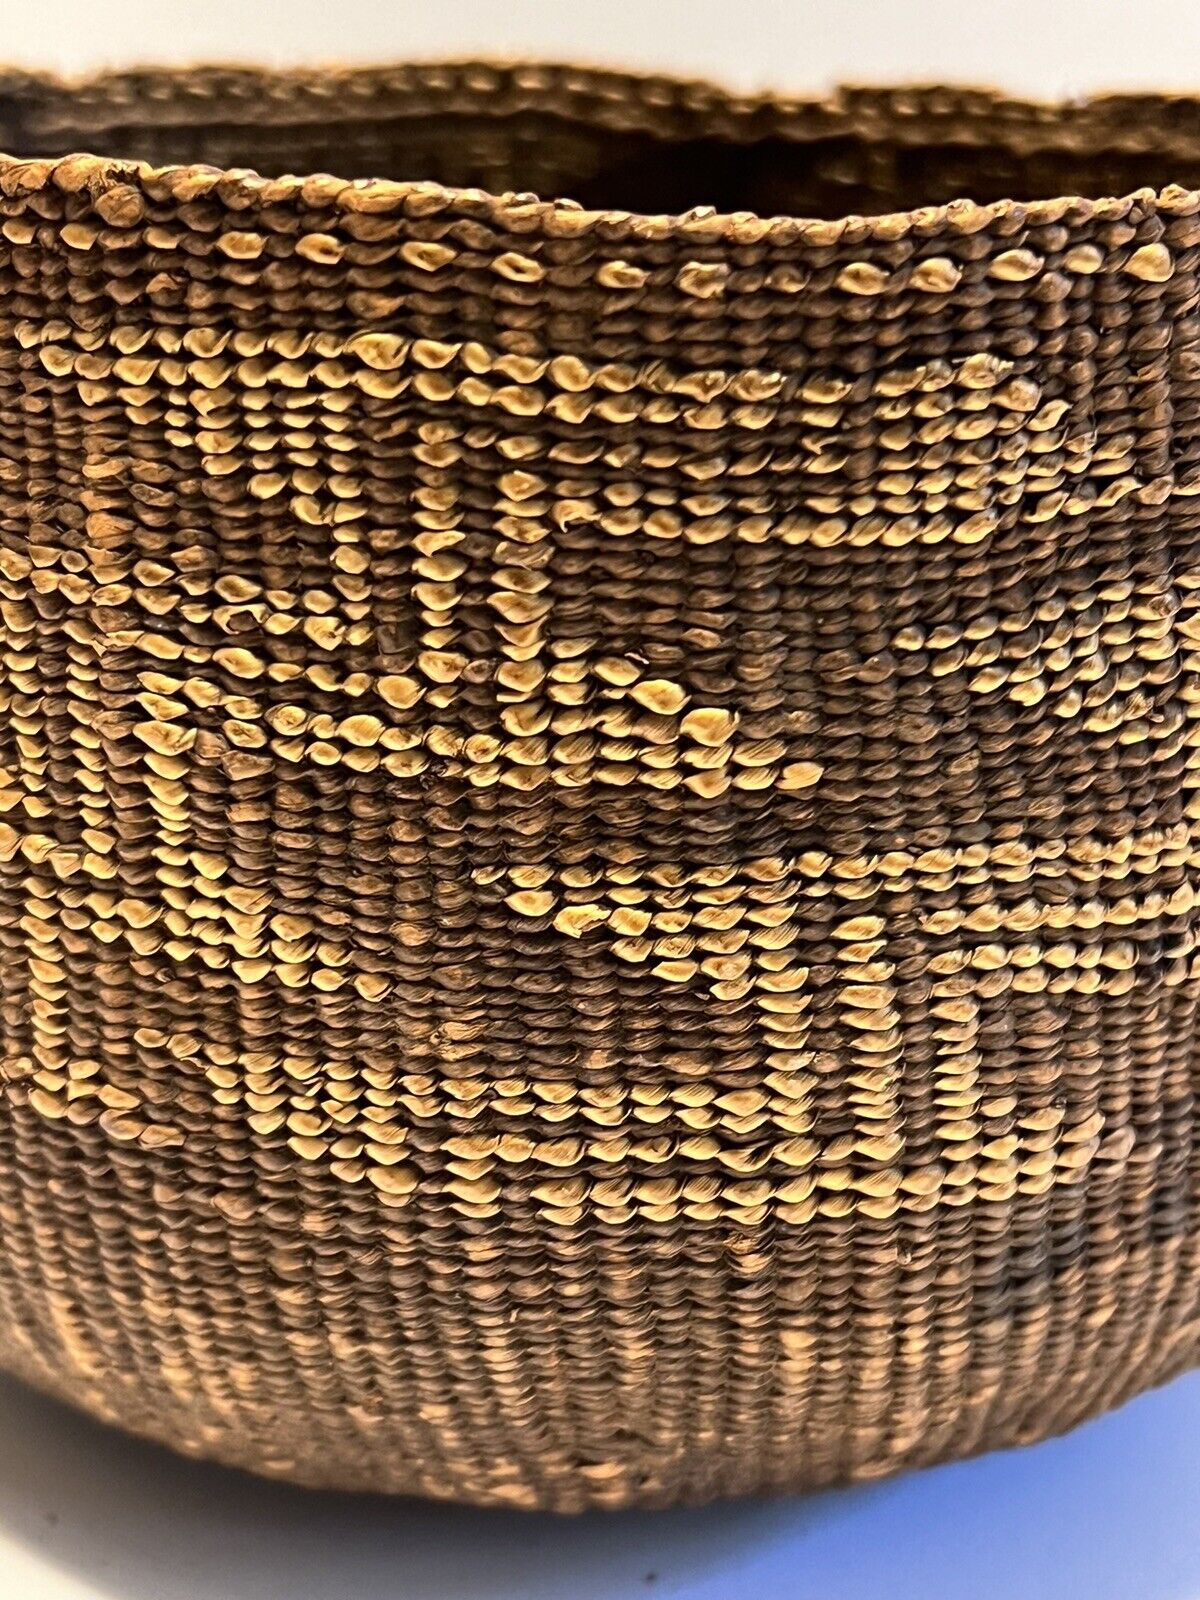 Native American Tinglet Hand Woven Basket or Hat, 1890’s - 1920’s: Lot 12